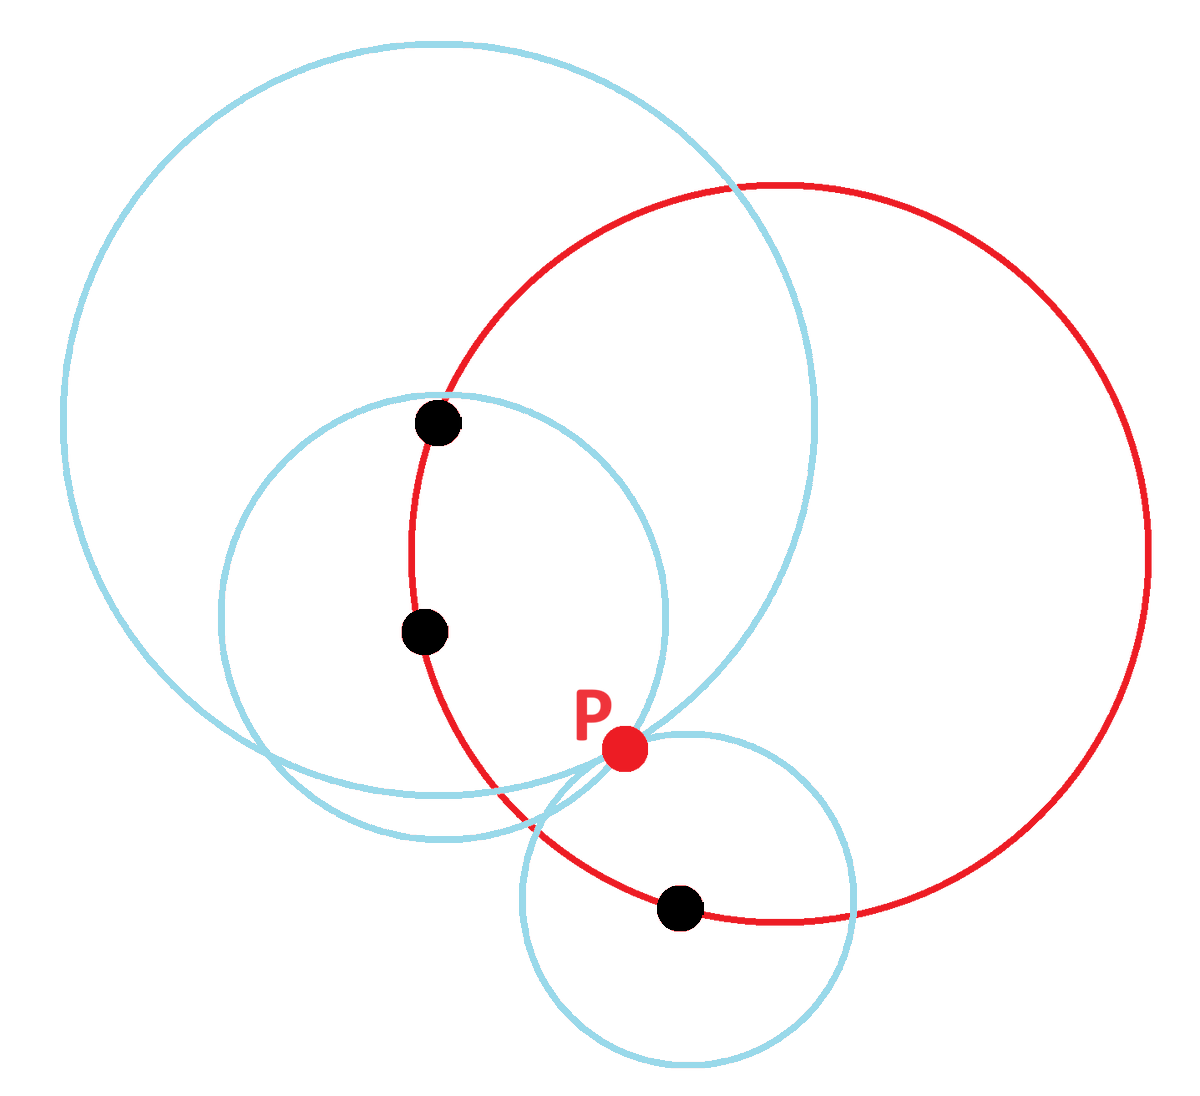 Backwards ... Circle C & point P inside the circle. For each point on C draw the circle that passes through P. What is the convex hull of all these circles? [I can get parametric equns for this enveloping curve. But I suspect an explicit equation for it is quite unpleasant!]